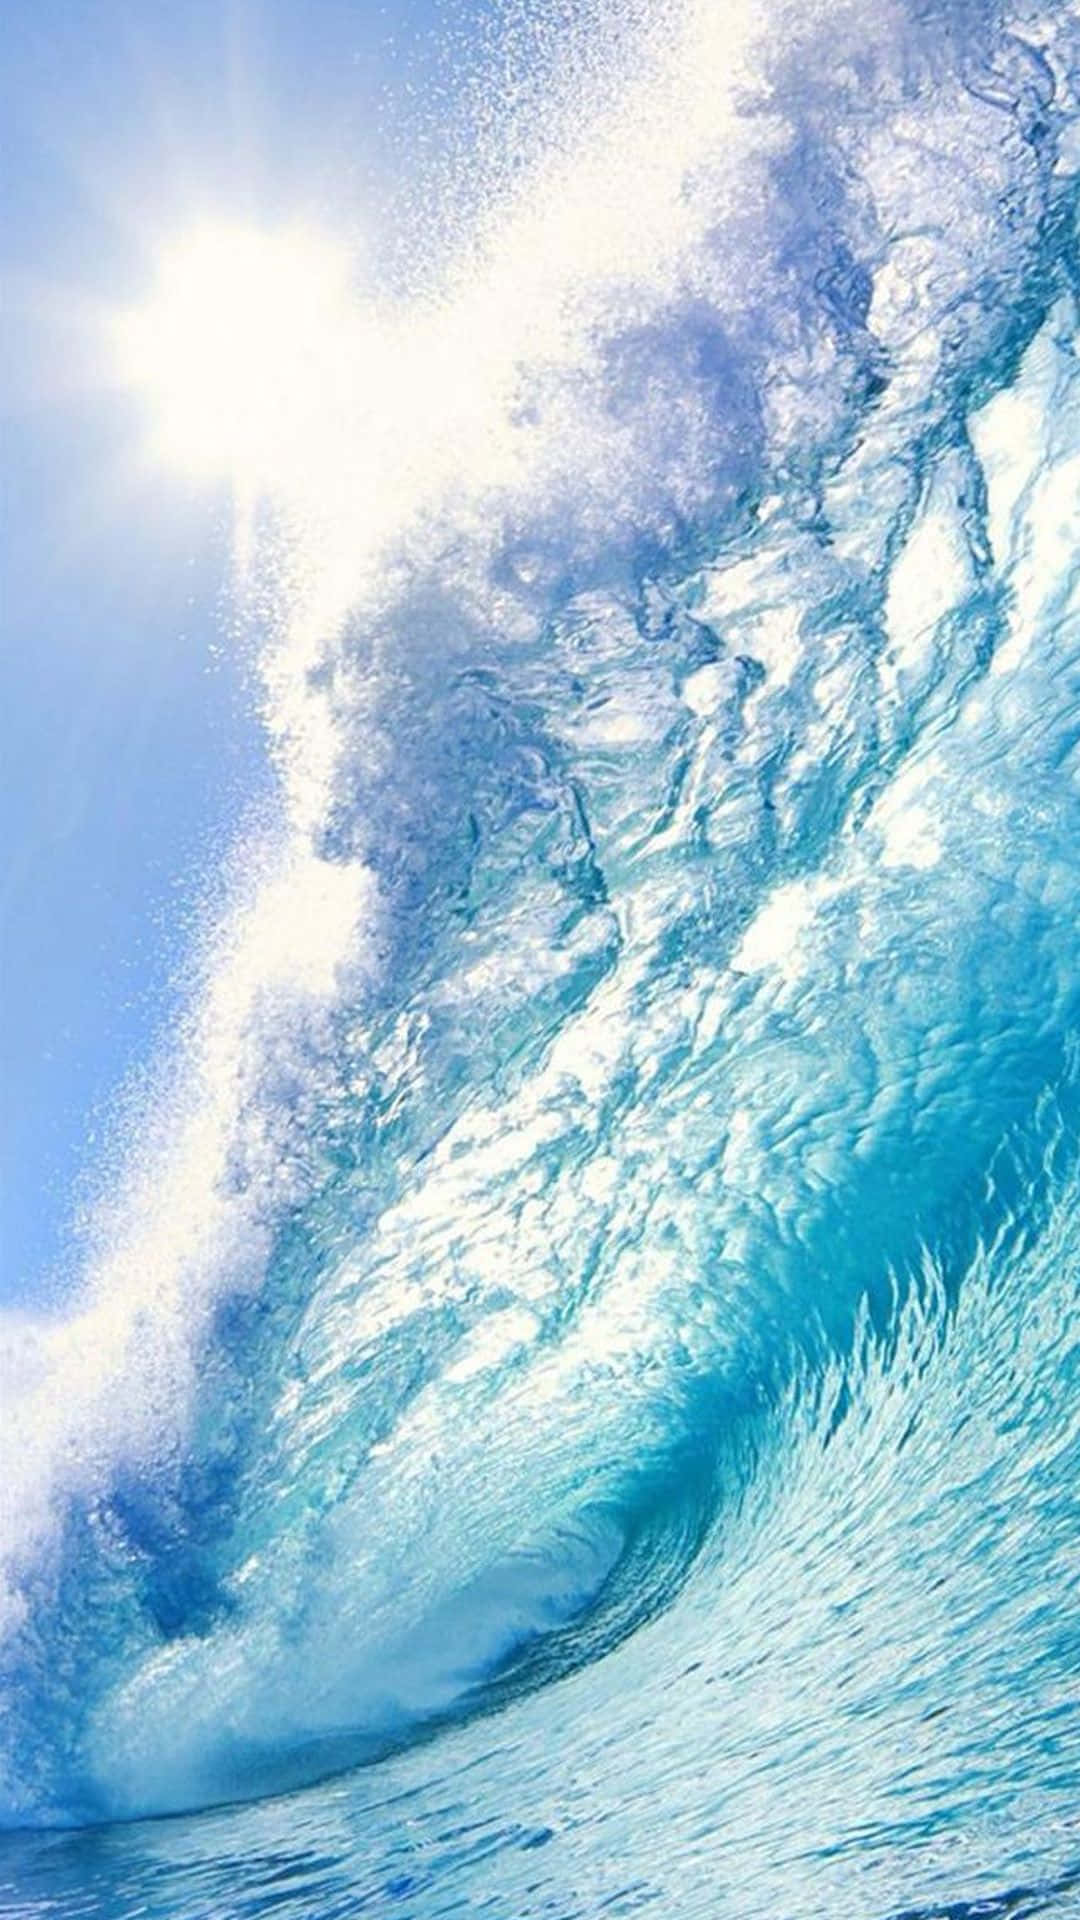 "Catching the Wave: Enjoy the ultimate surfing experience with your iPhone" Wallpaper